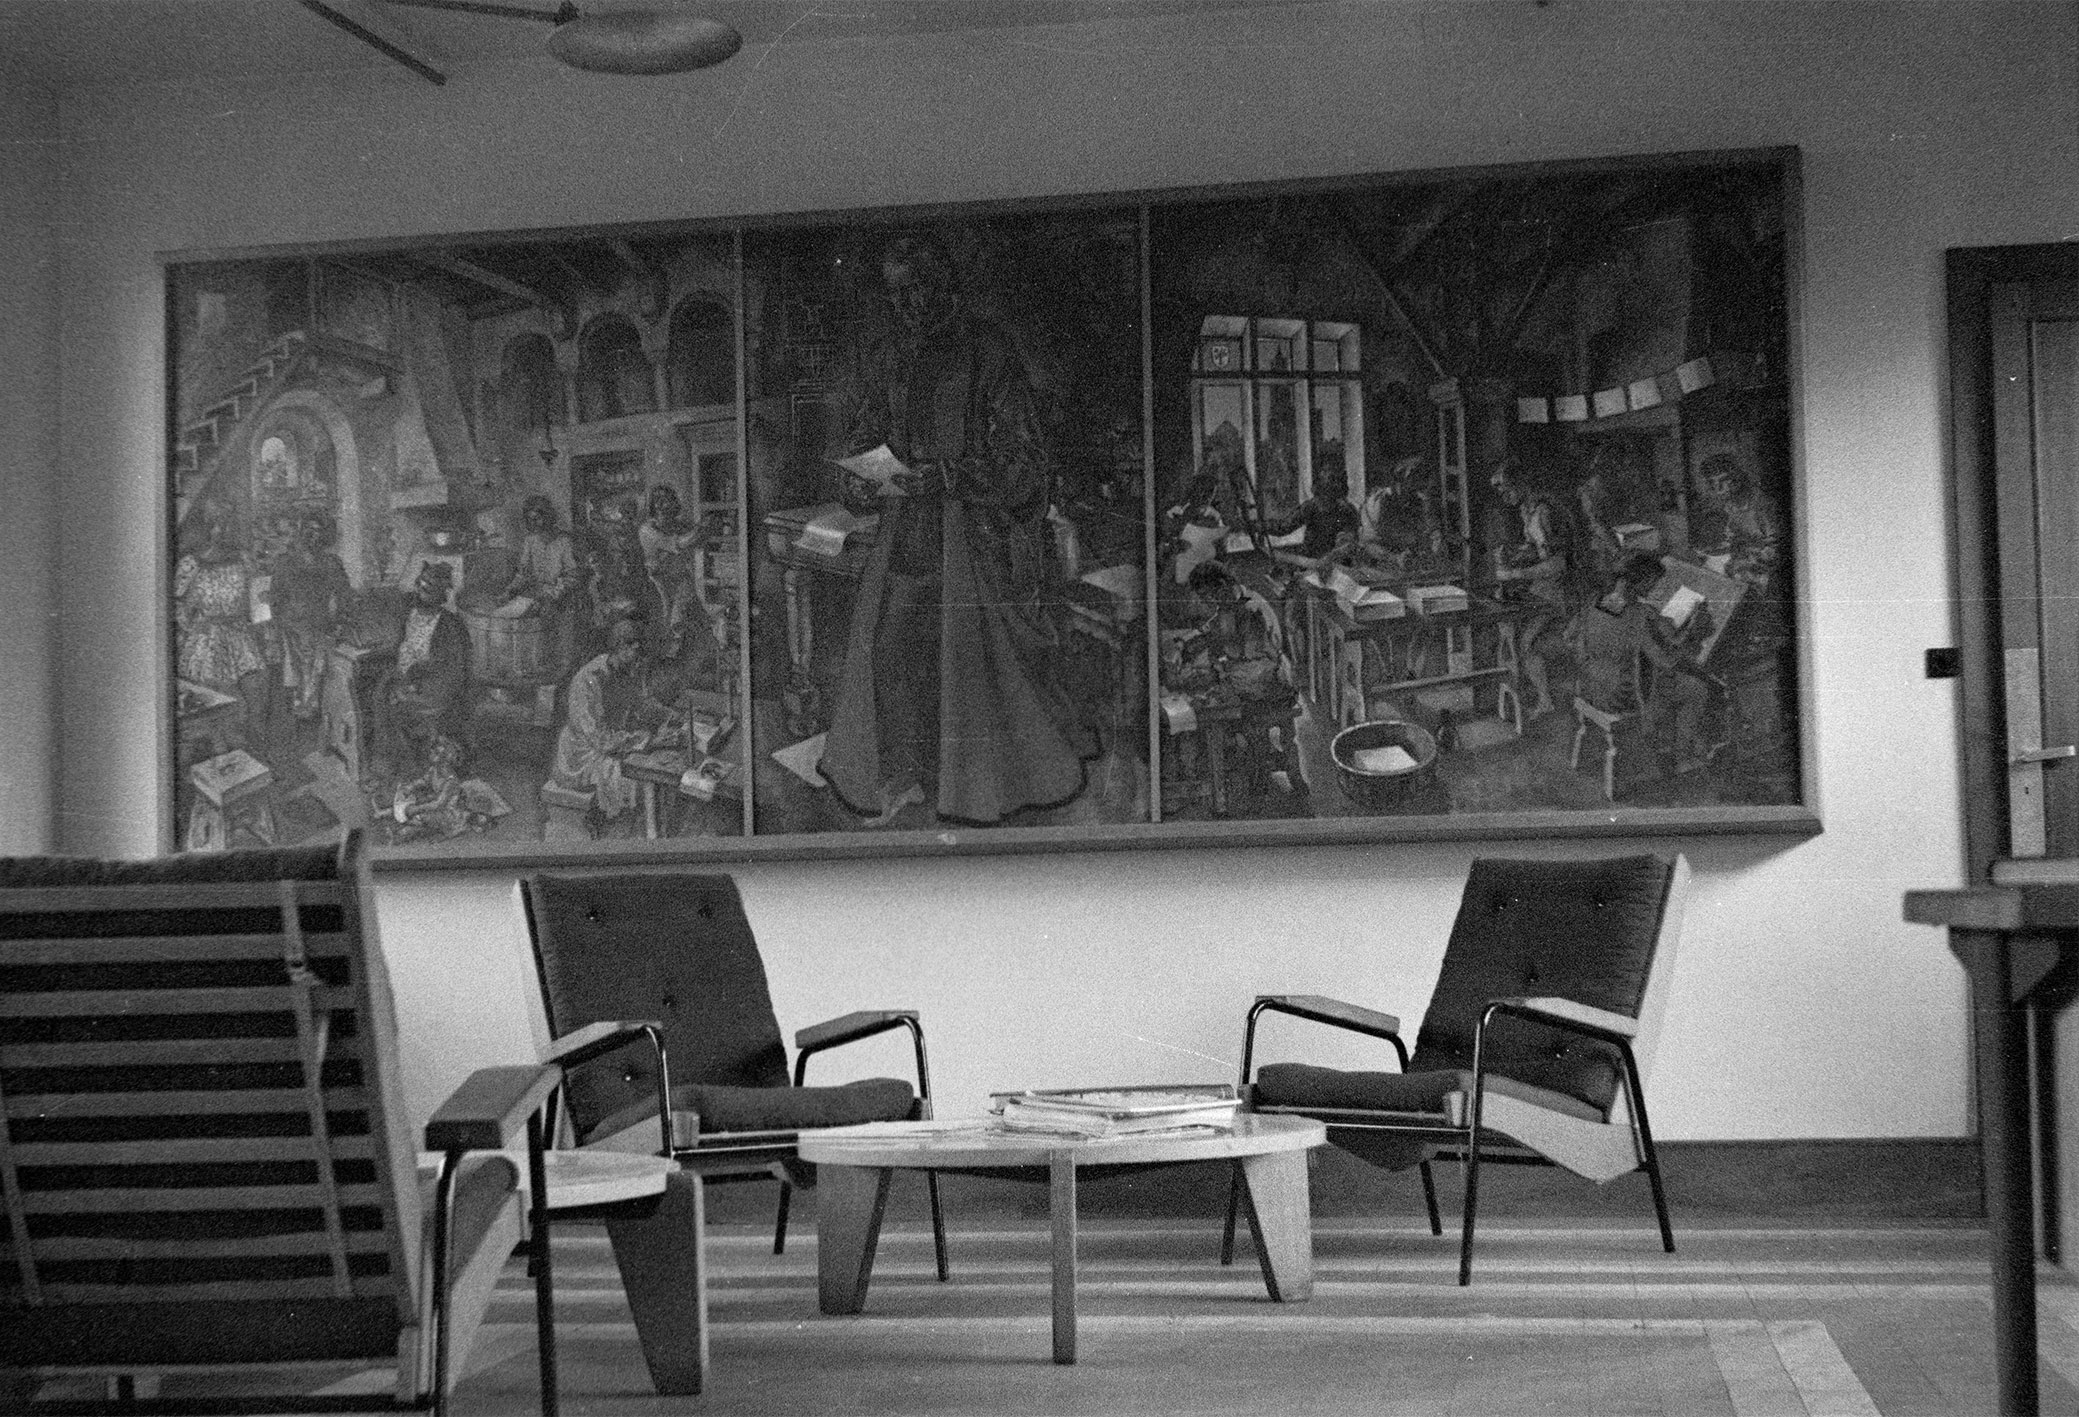 Lobby of the Berger-Levrault printing works, Nancy, equipped with Visiteur armchairs and guéridons bas, ca. 1942.